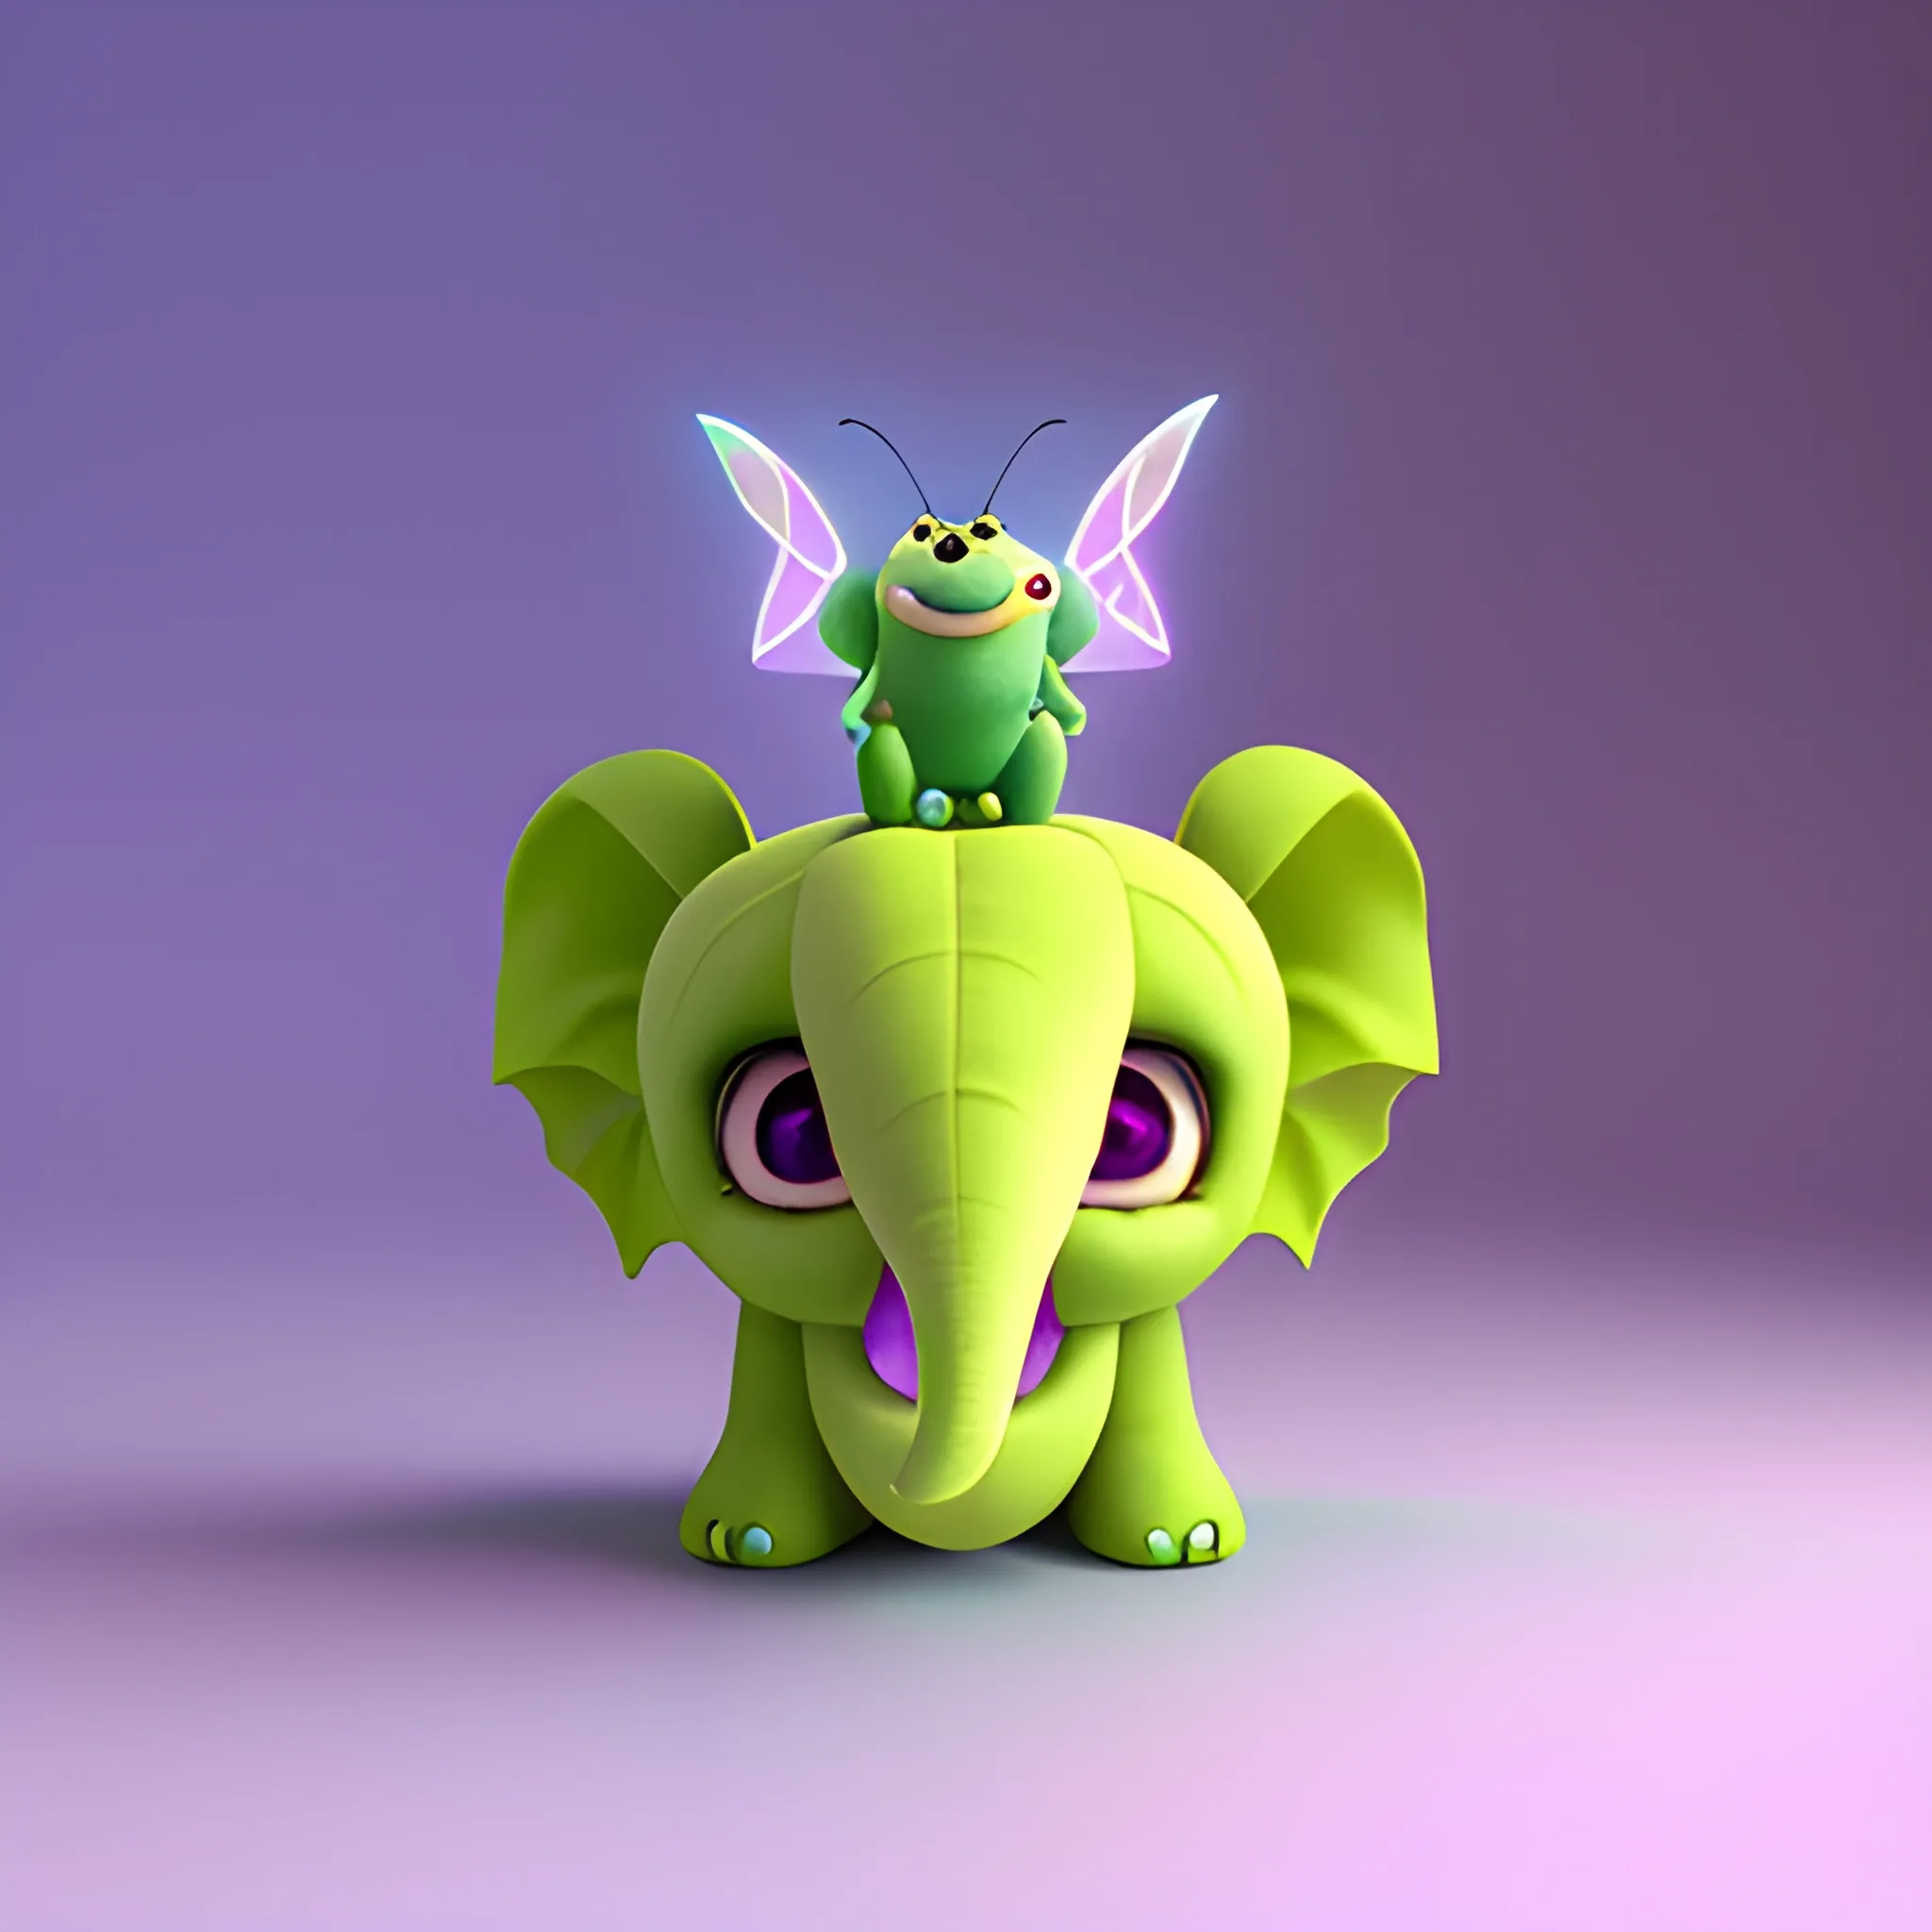 , 3D, Cartoon, Cute light lime Monster baby elefant, plush shaggy  body, with colorful butterfly wings on the back, eating  pallete ice cream coffee with higs, 3D, Hk , kwaii, like monster inc of pixar style, two saturate light filter color